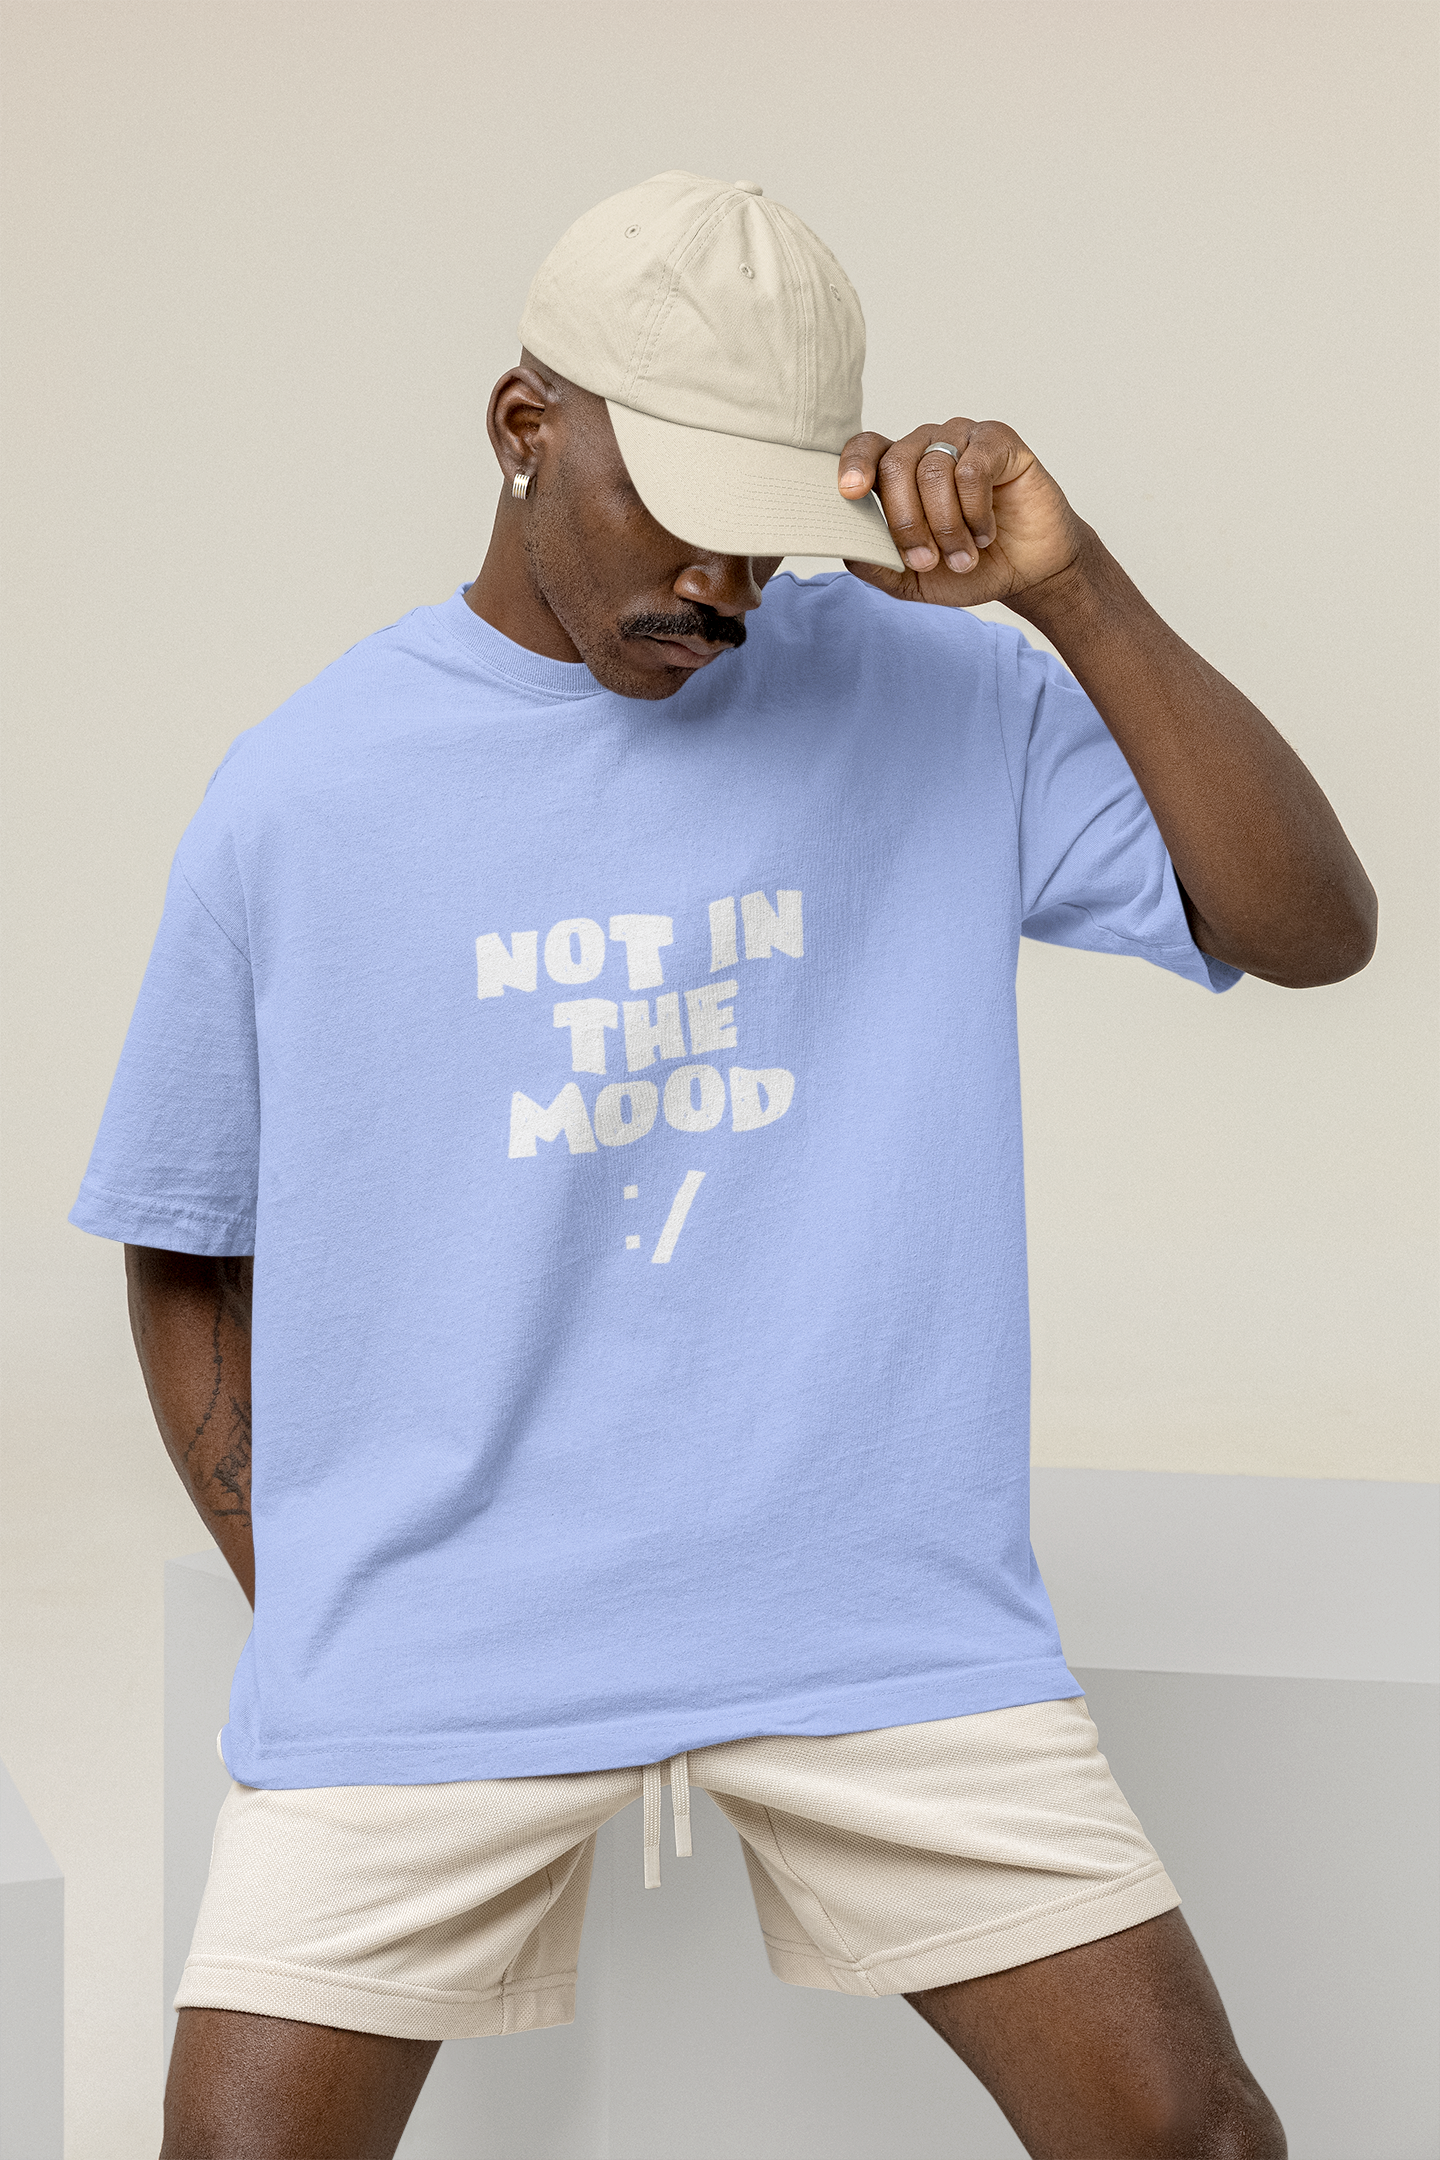 OVERSIZED TSHIRTS BABY BLUE: NOT IN MOOD